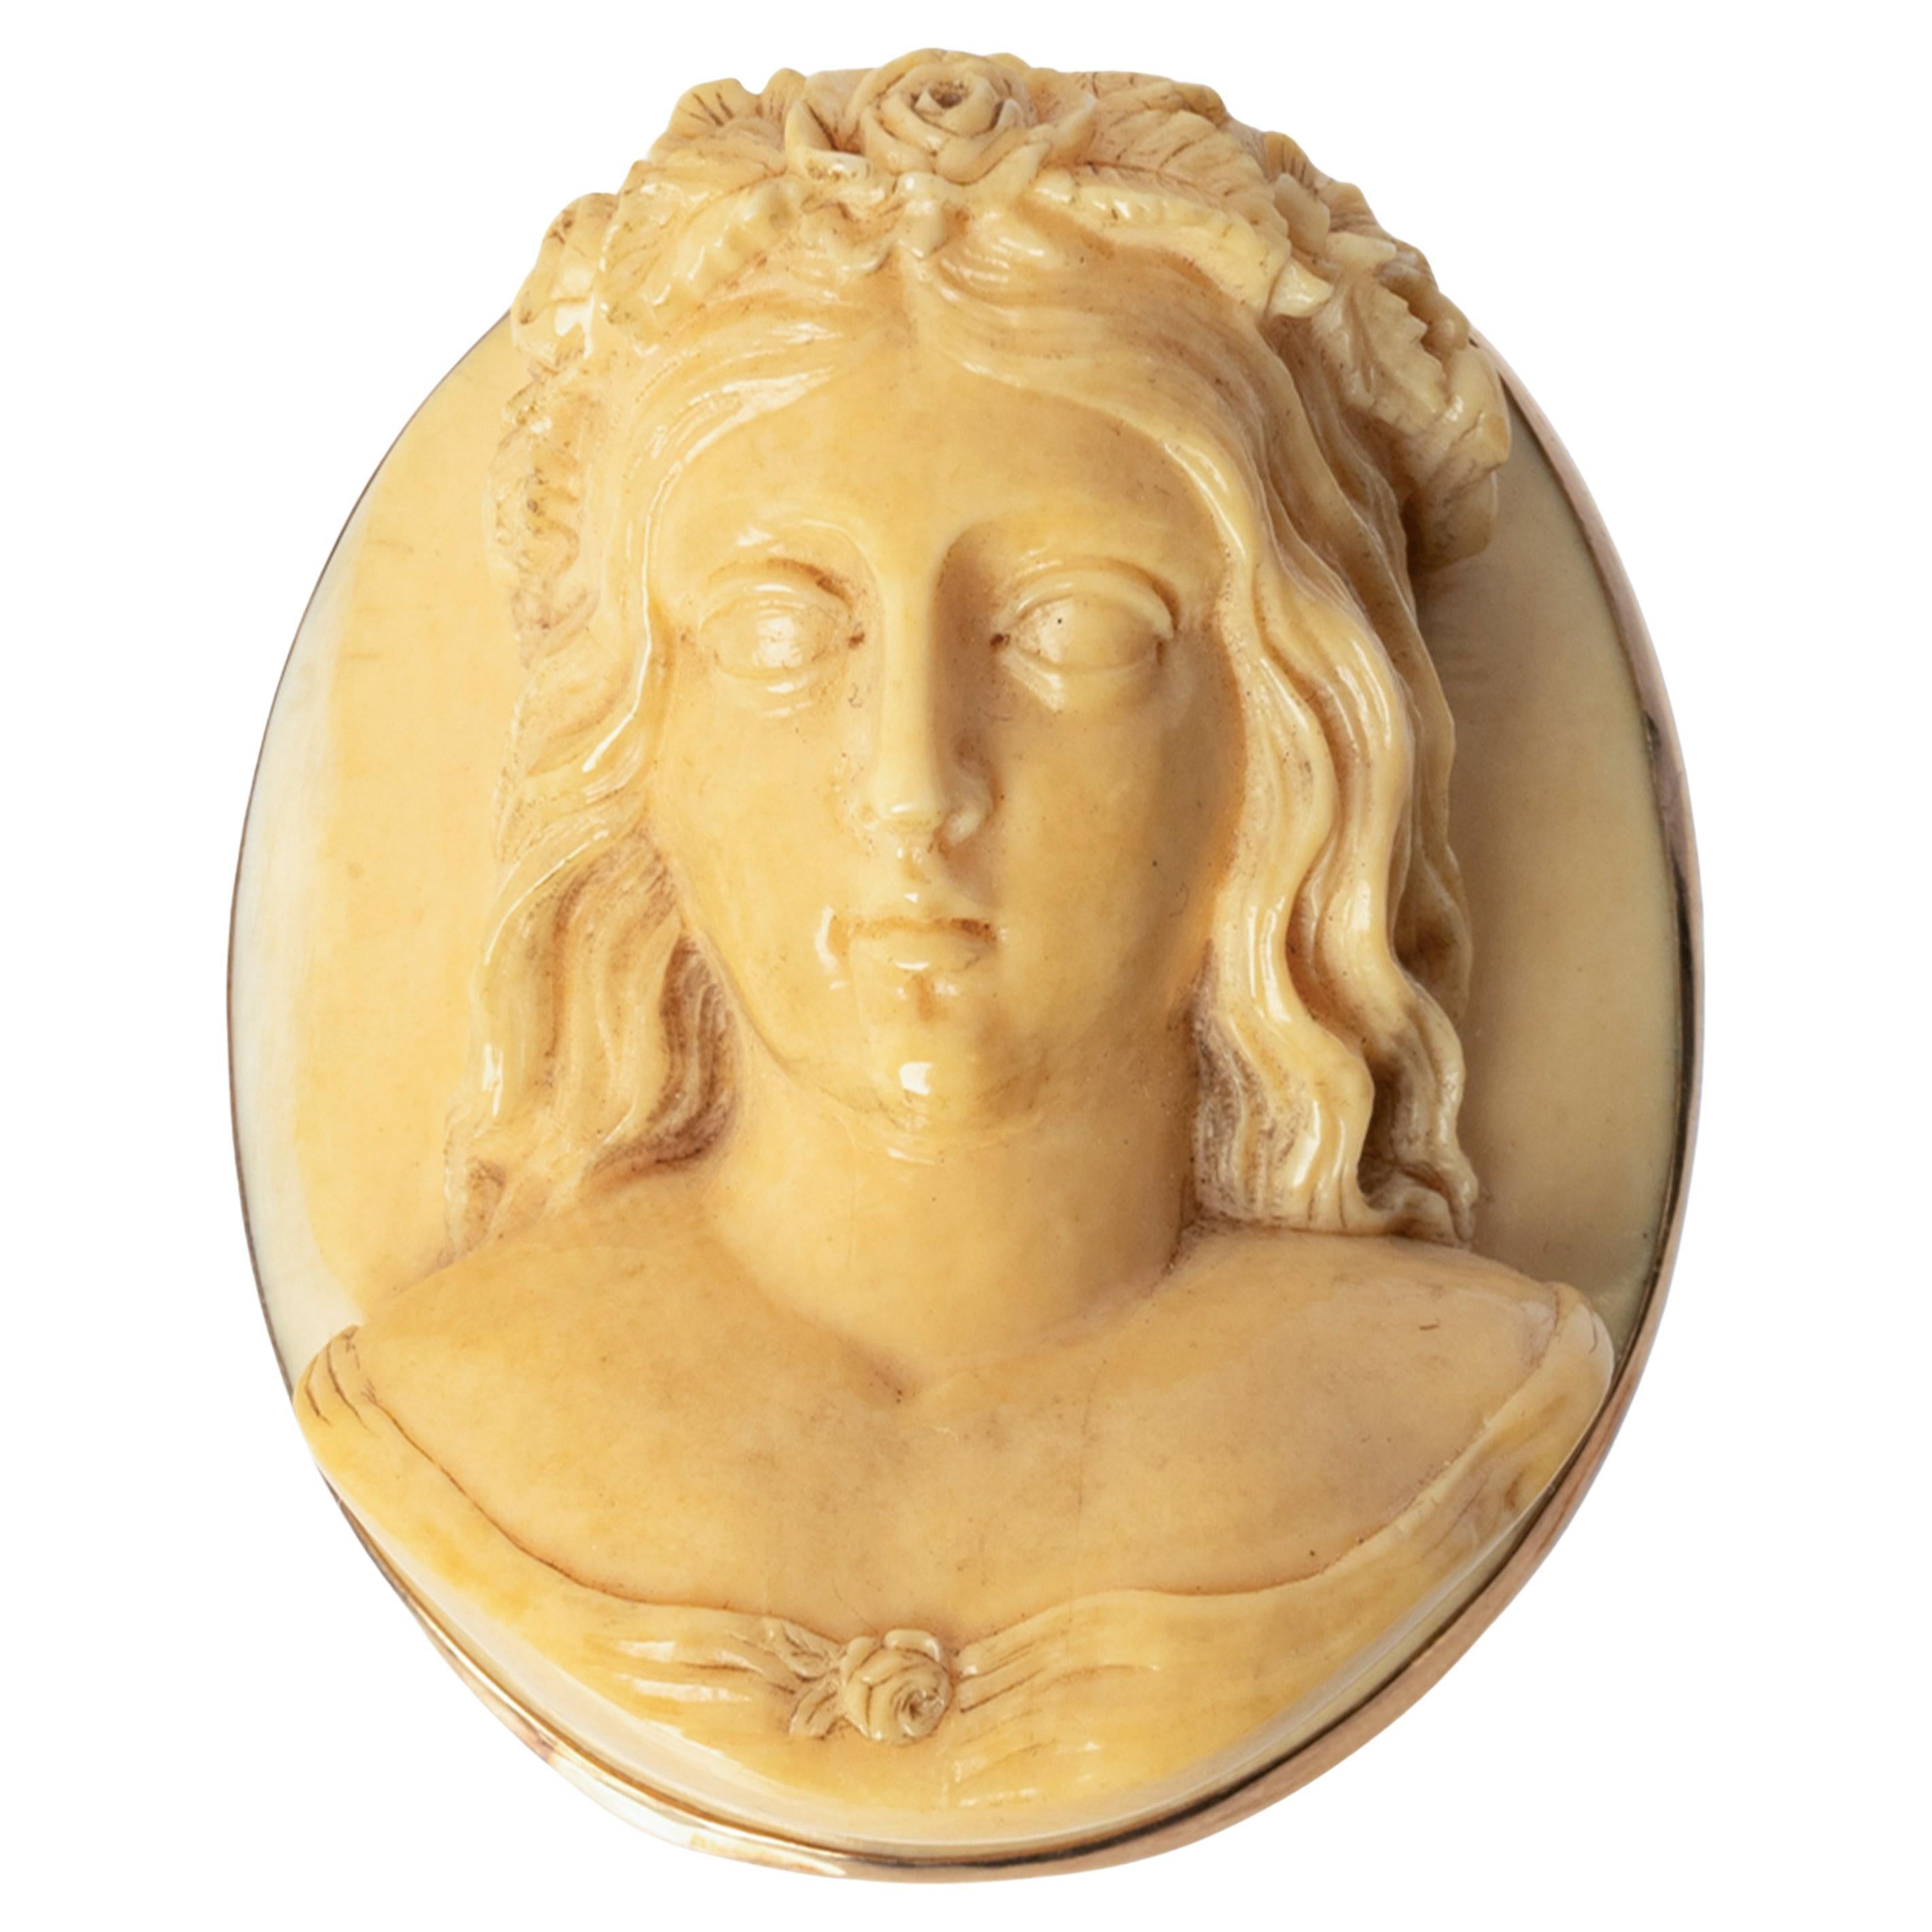 Antique 19th Century Ivory 14 k Gold Pre-Raphaelite Cameo Brooch Pendant 1870 In Good Condition For Sale In Portland, OR